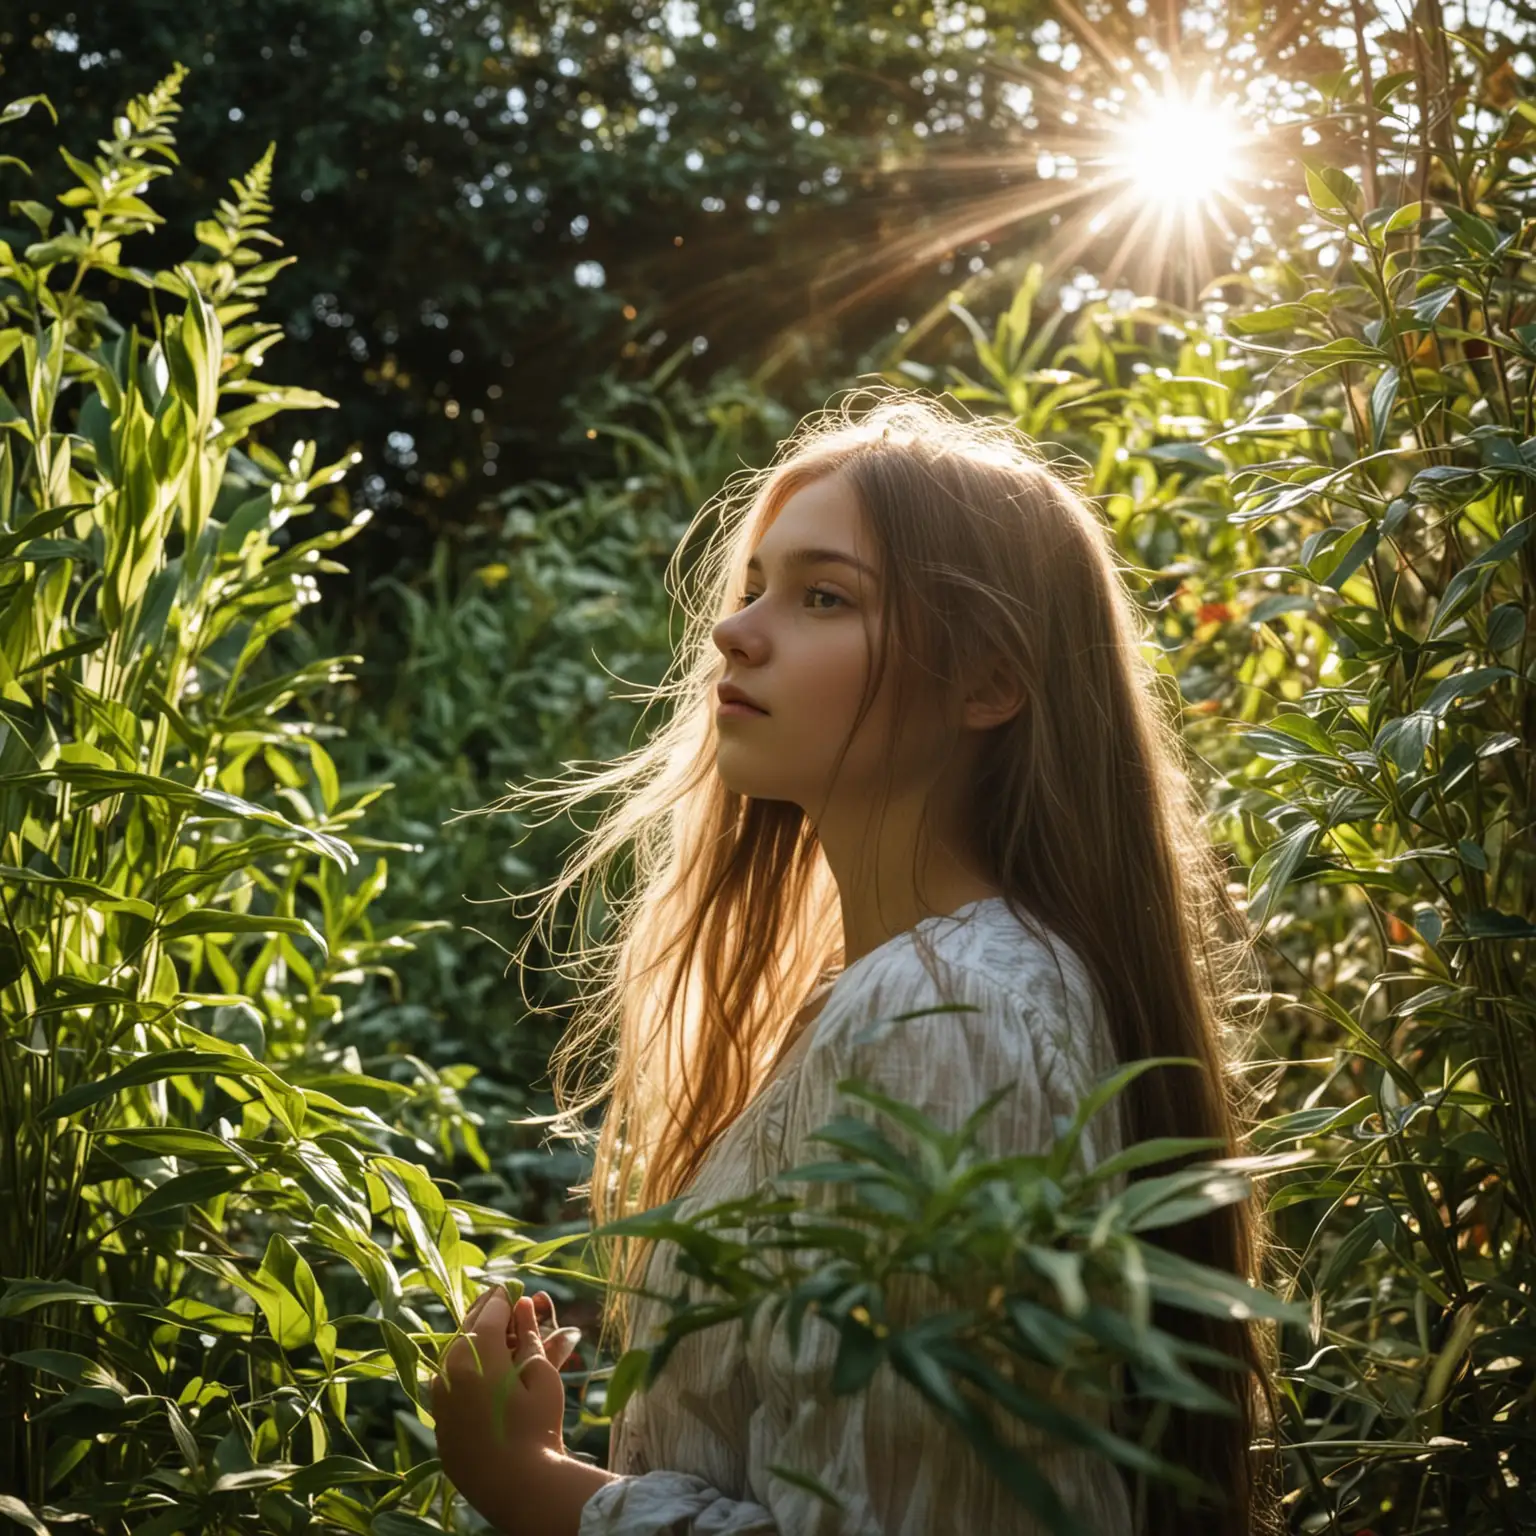 girl with open hair, standing in plants, sunlight